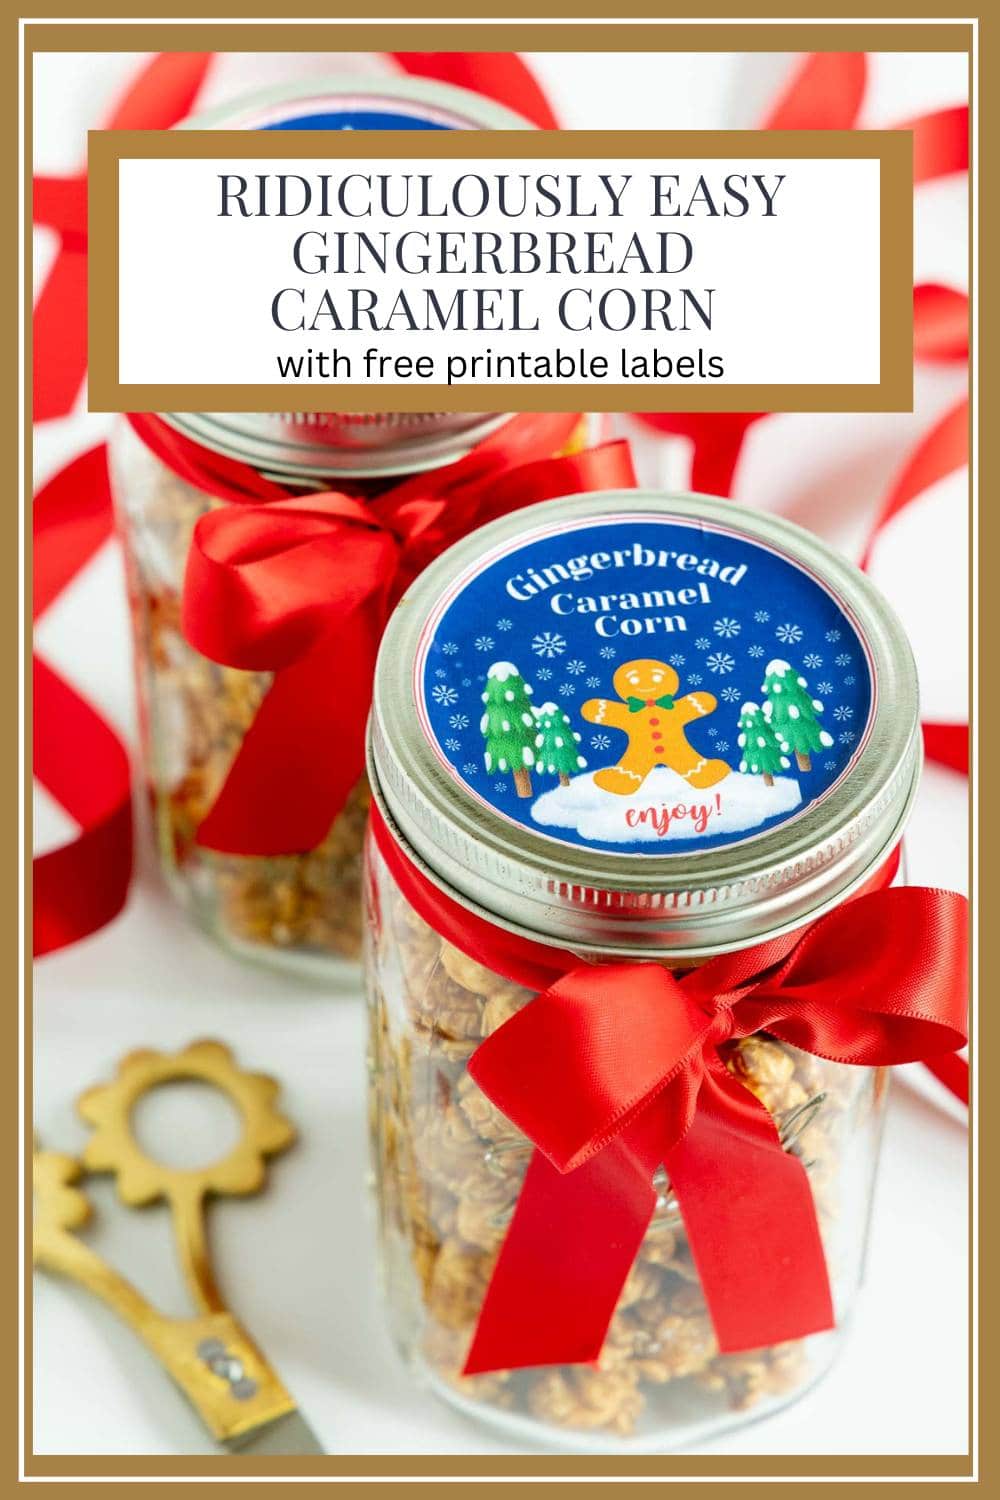 Ridiculously Easy Gingerbread Caramel Corn (with free printable labels for gifting)